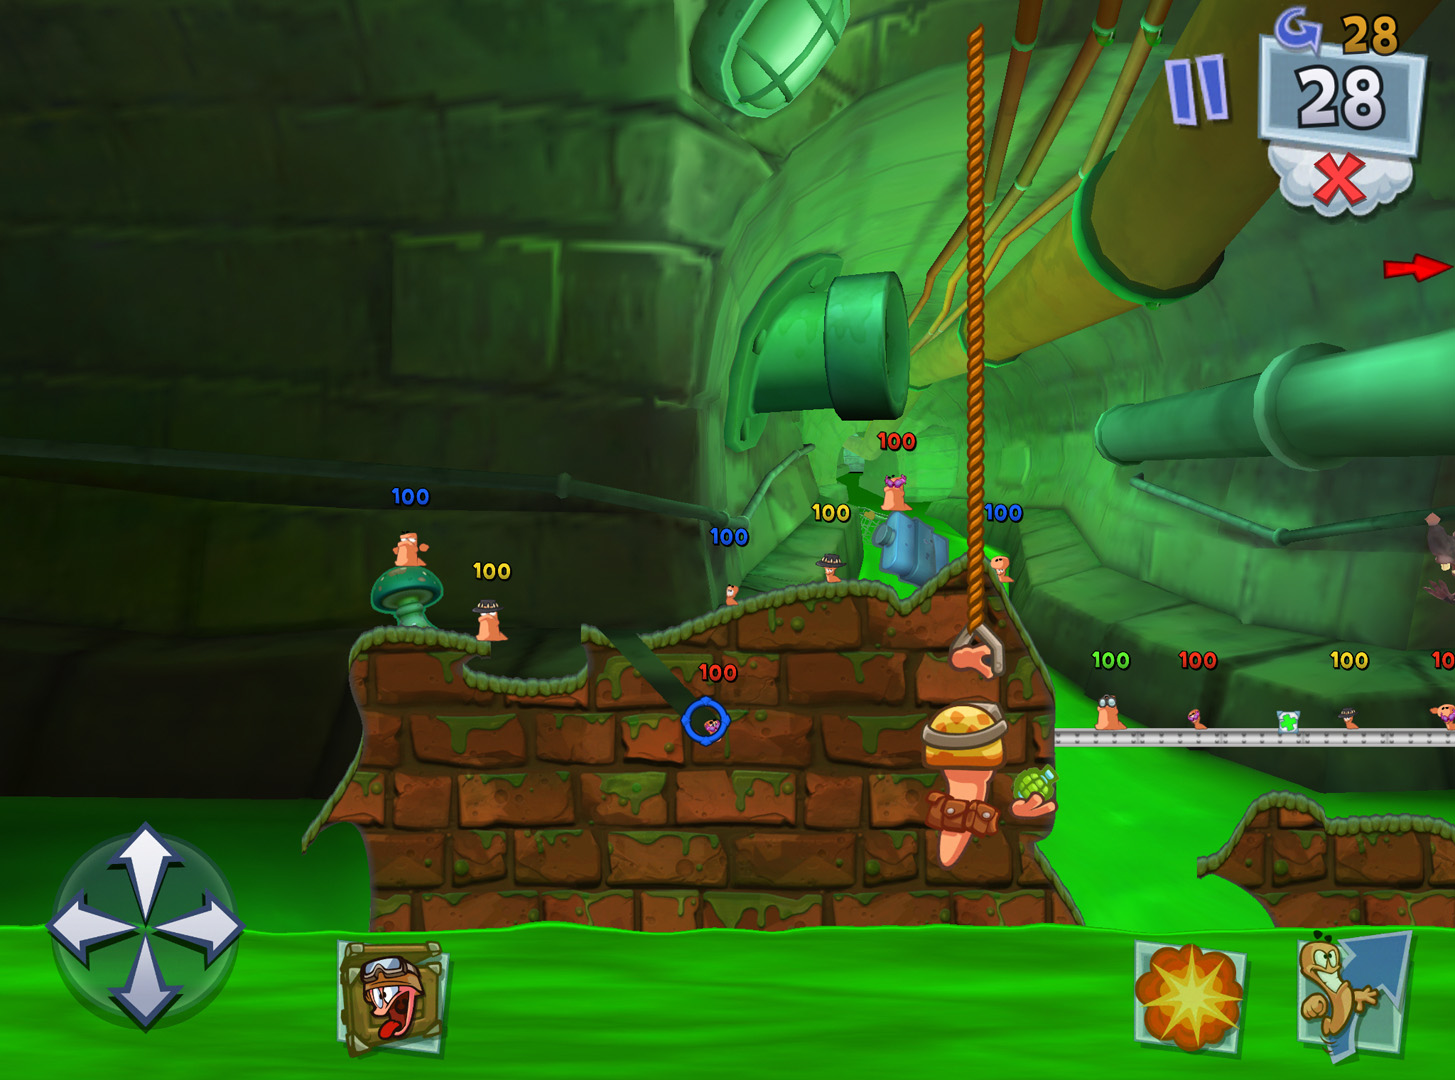 Team17 Finally Making Worms 3. No, Worms 3D Didn’t Count.